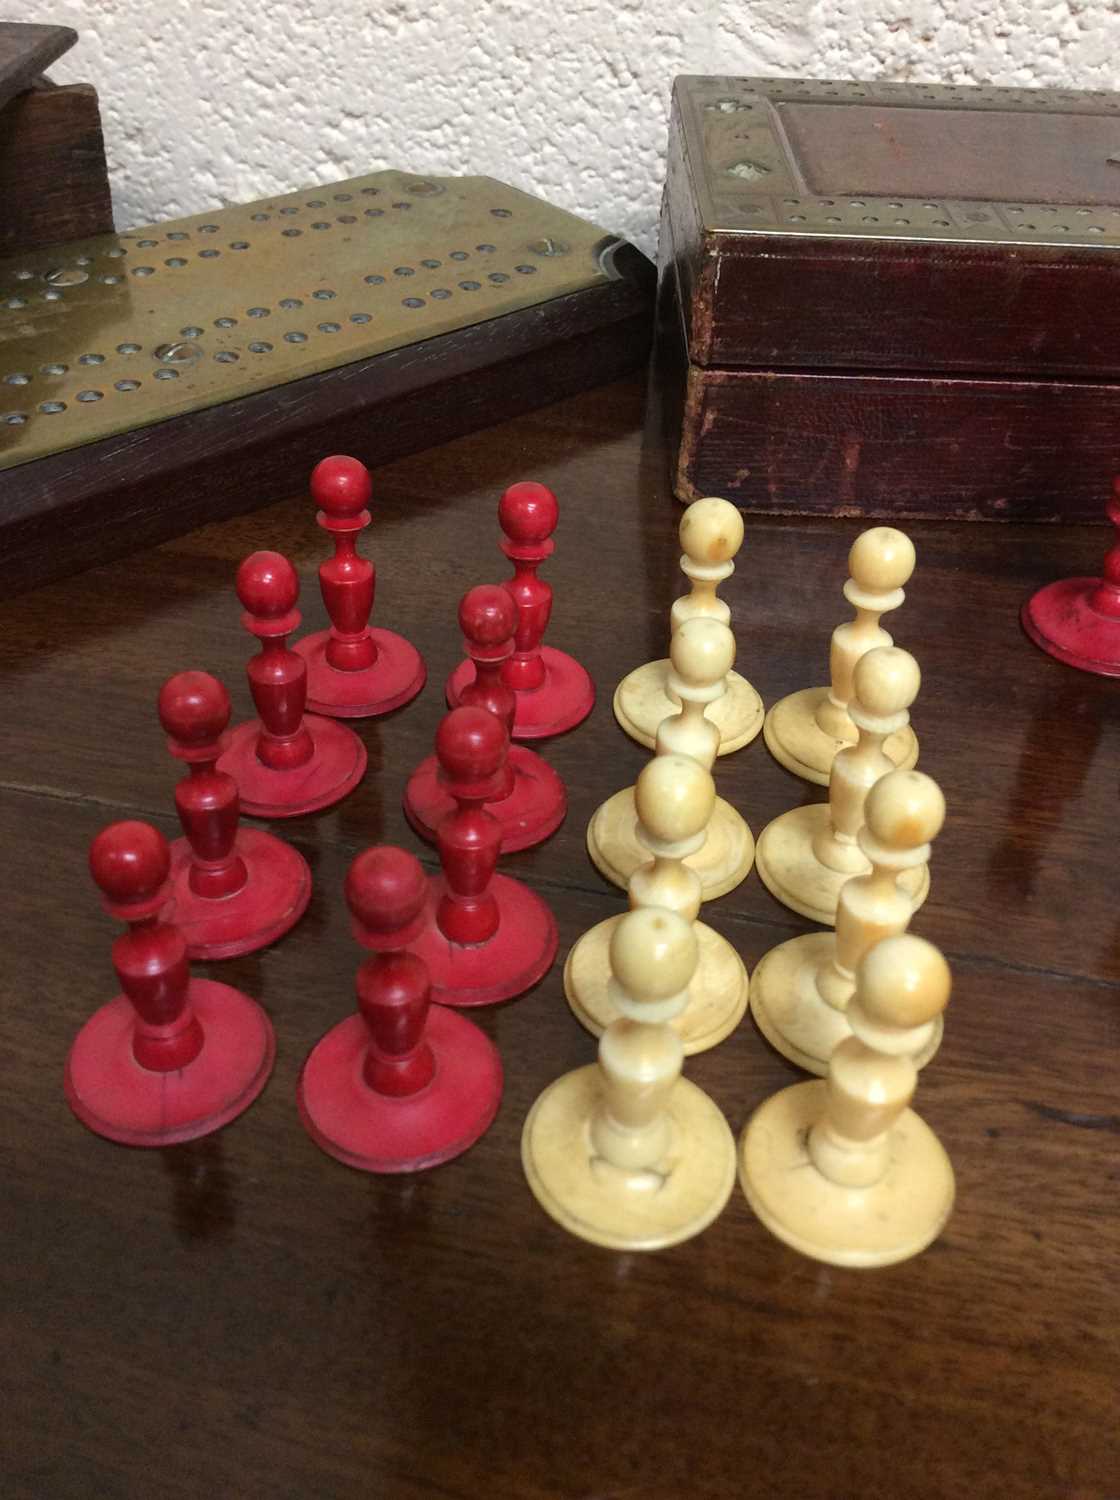 A 19th century turned and stained ivory chess set, a turned ebony and boxwood chess set, a - Image 9 of 17